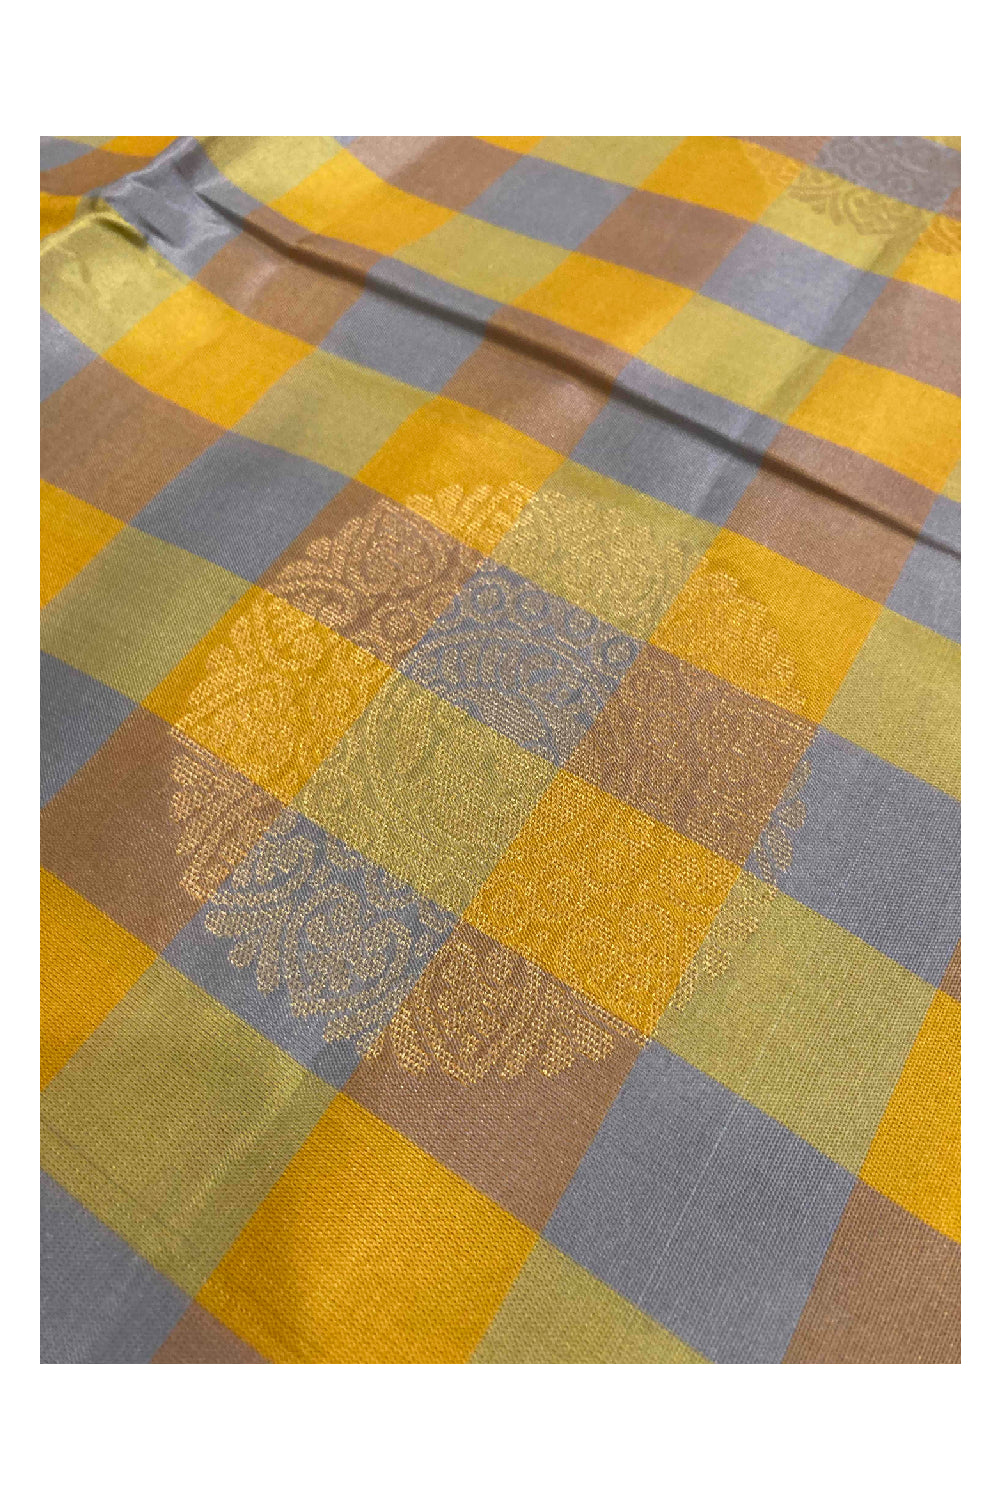 Southloom Handloom Pure Silk Kanchipuram Saree in Yellow Blue Checkered and Floral Motifs